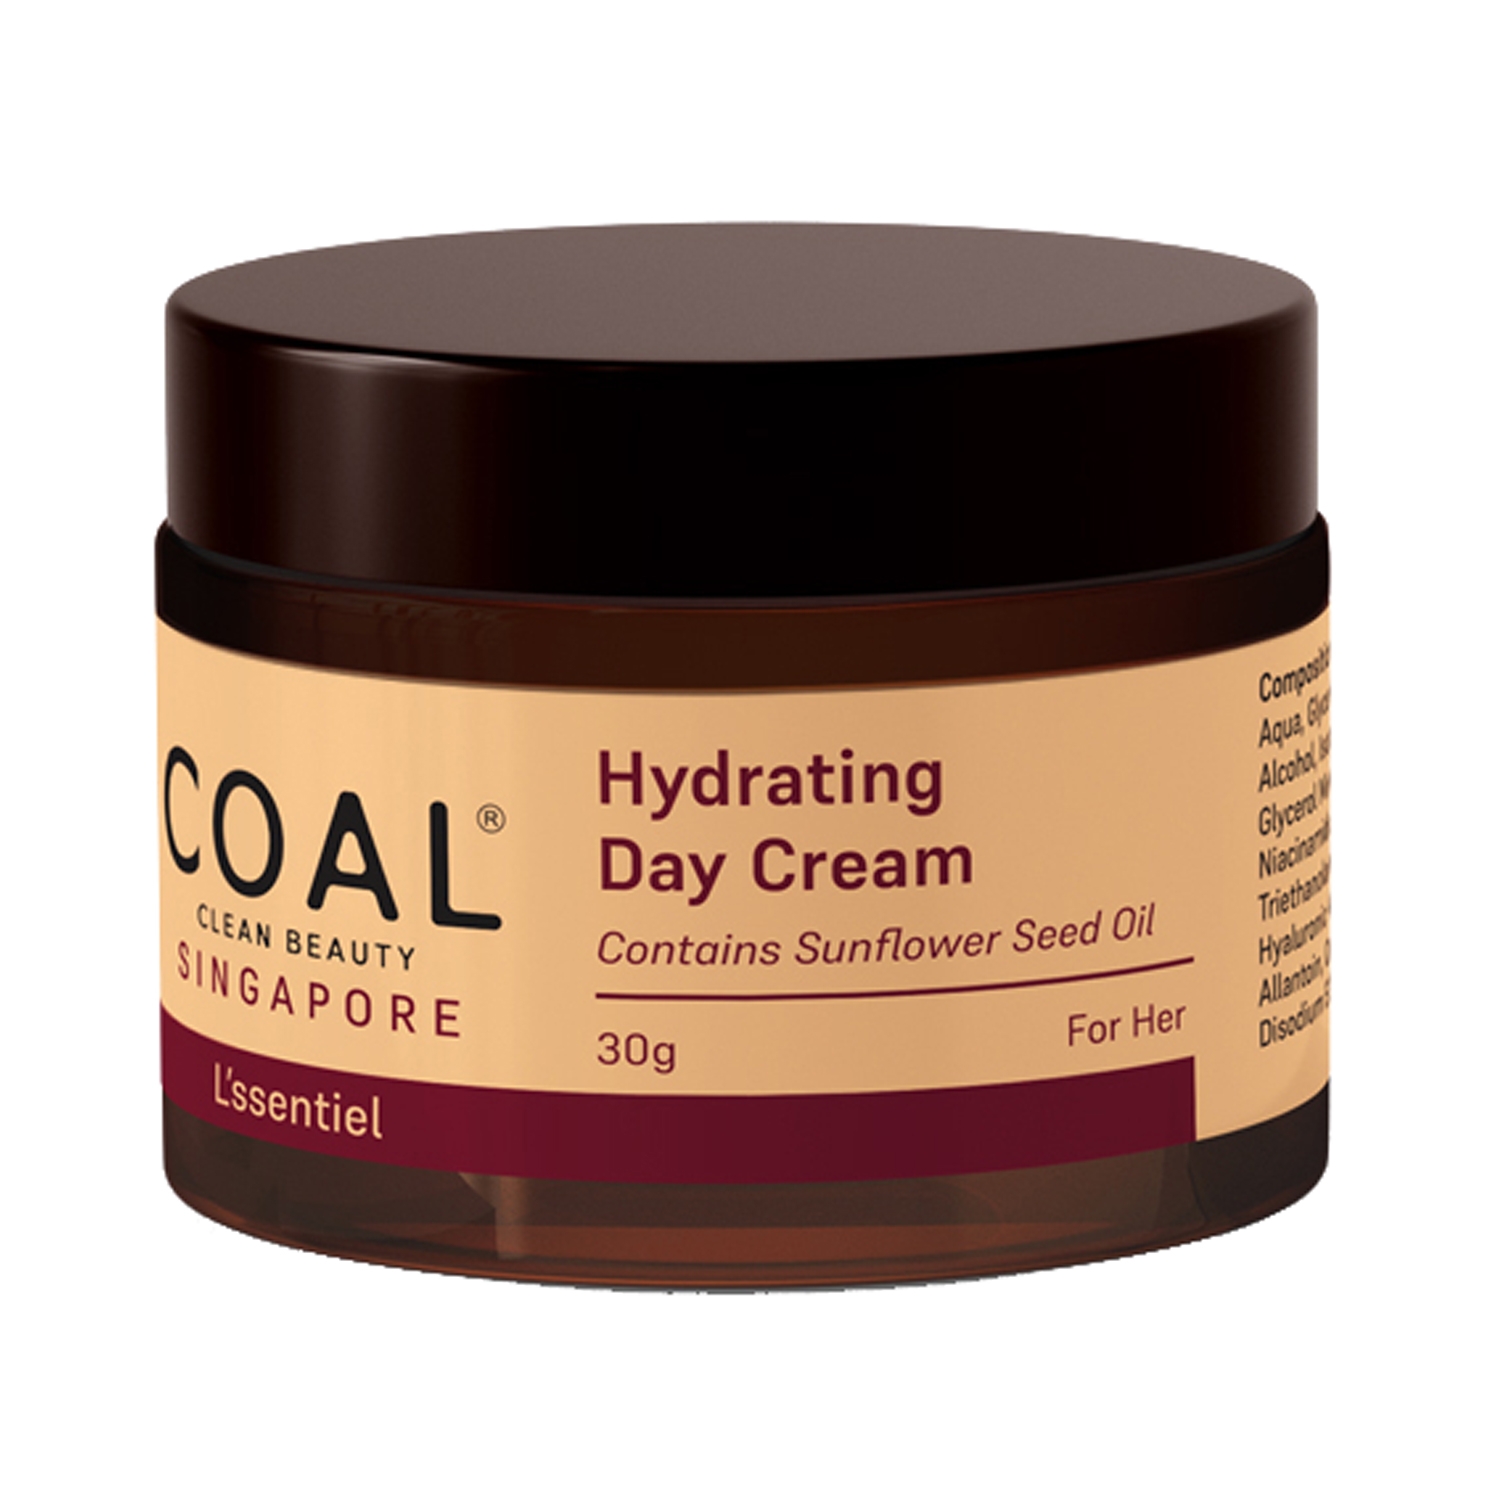 COAL CLEAN BEAUTY | COAL CLEAN BEAUTY Hydrating Day Cream For Her (30g)